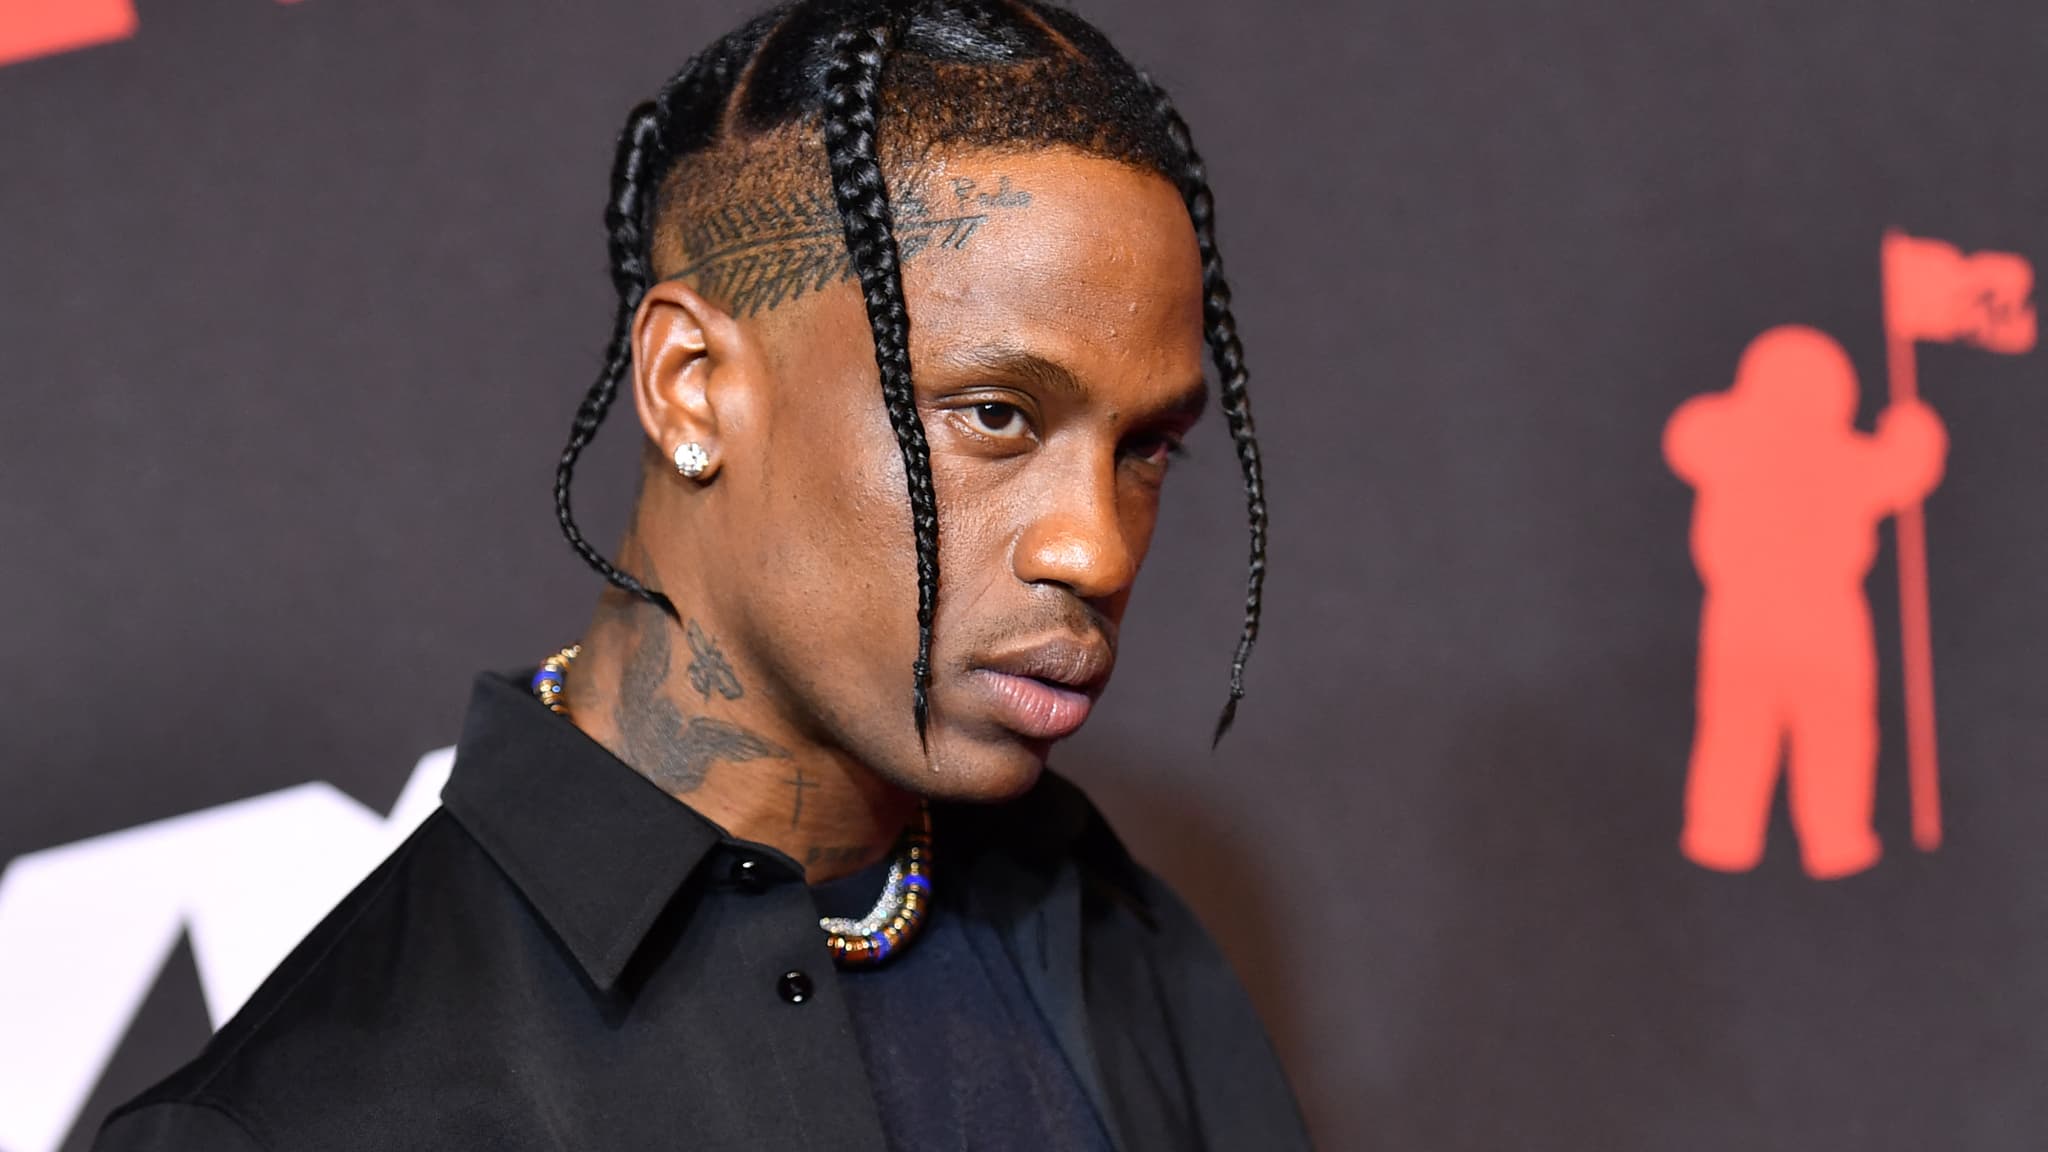 After Astroworld drama, Travis Scott launches 5 million aid package